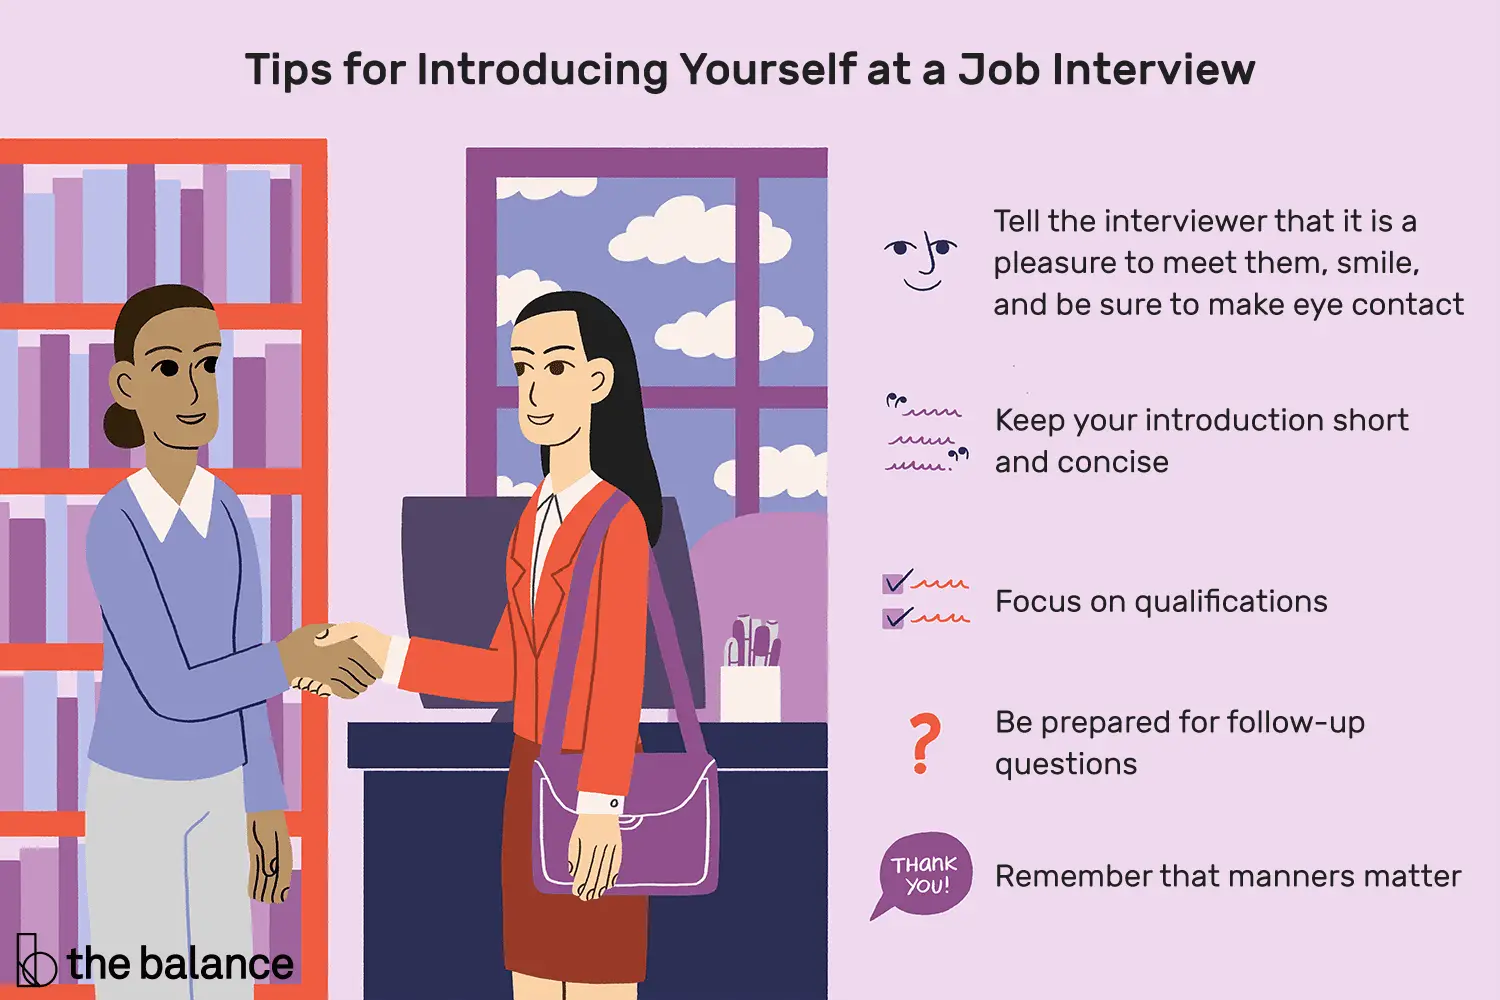 How to Introduce Yourself at a Job Interview